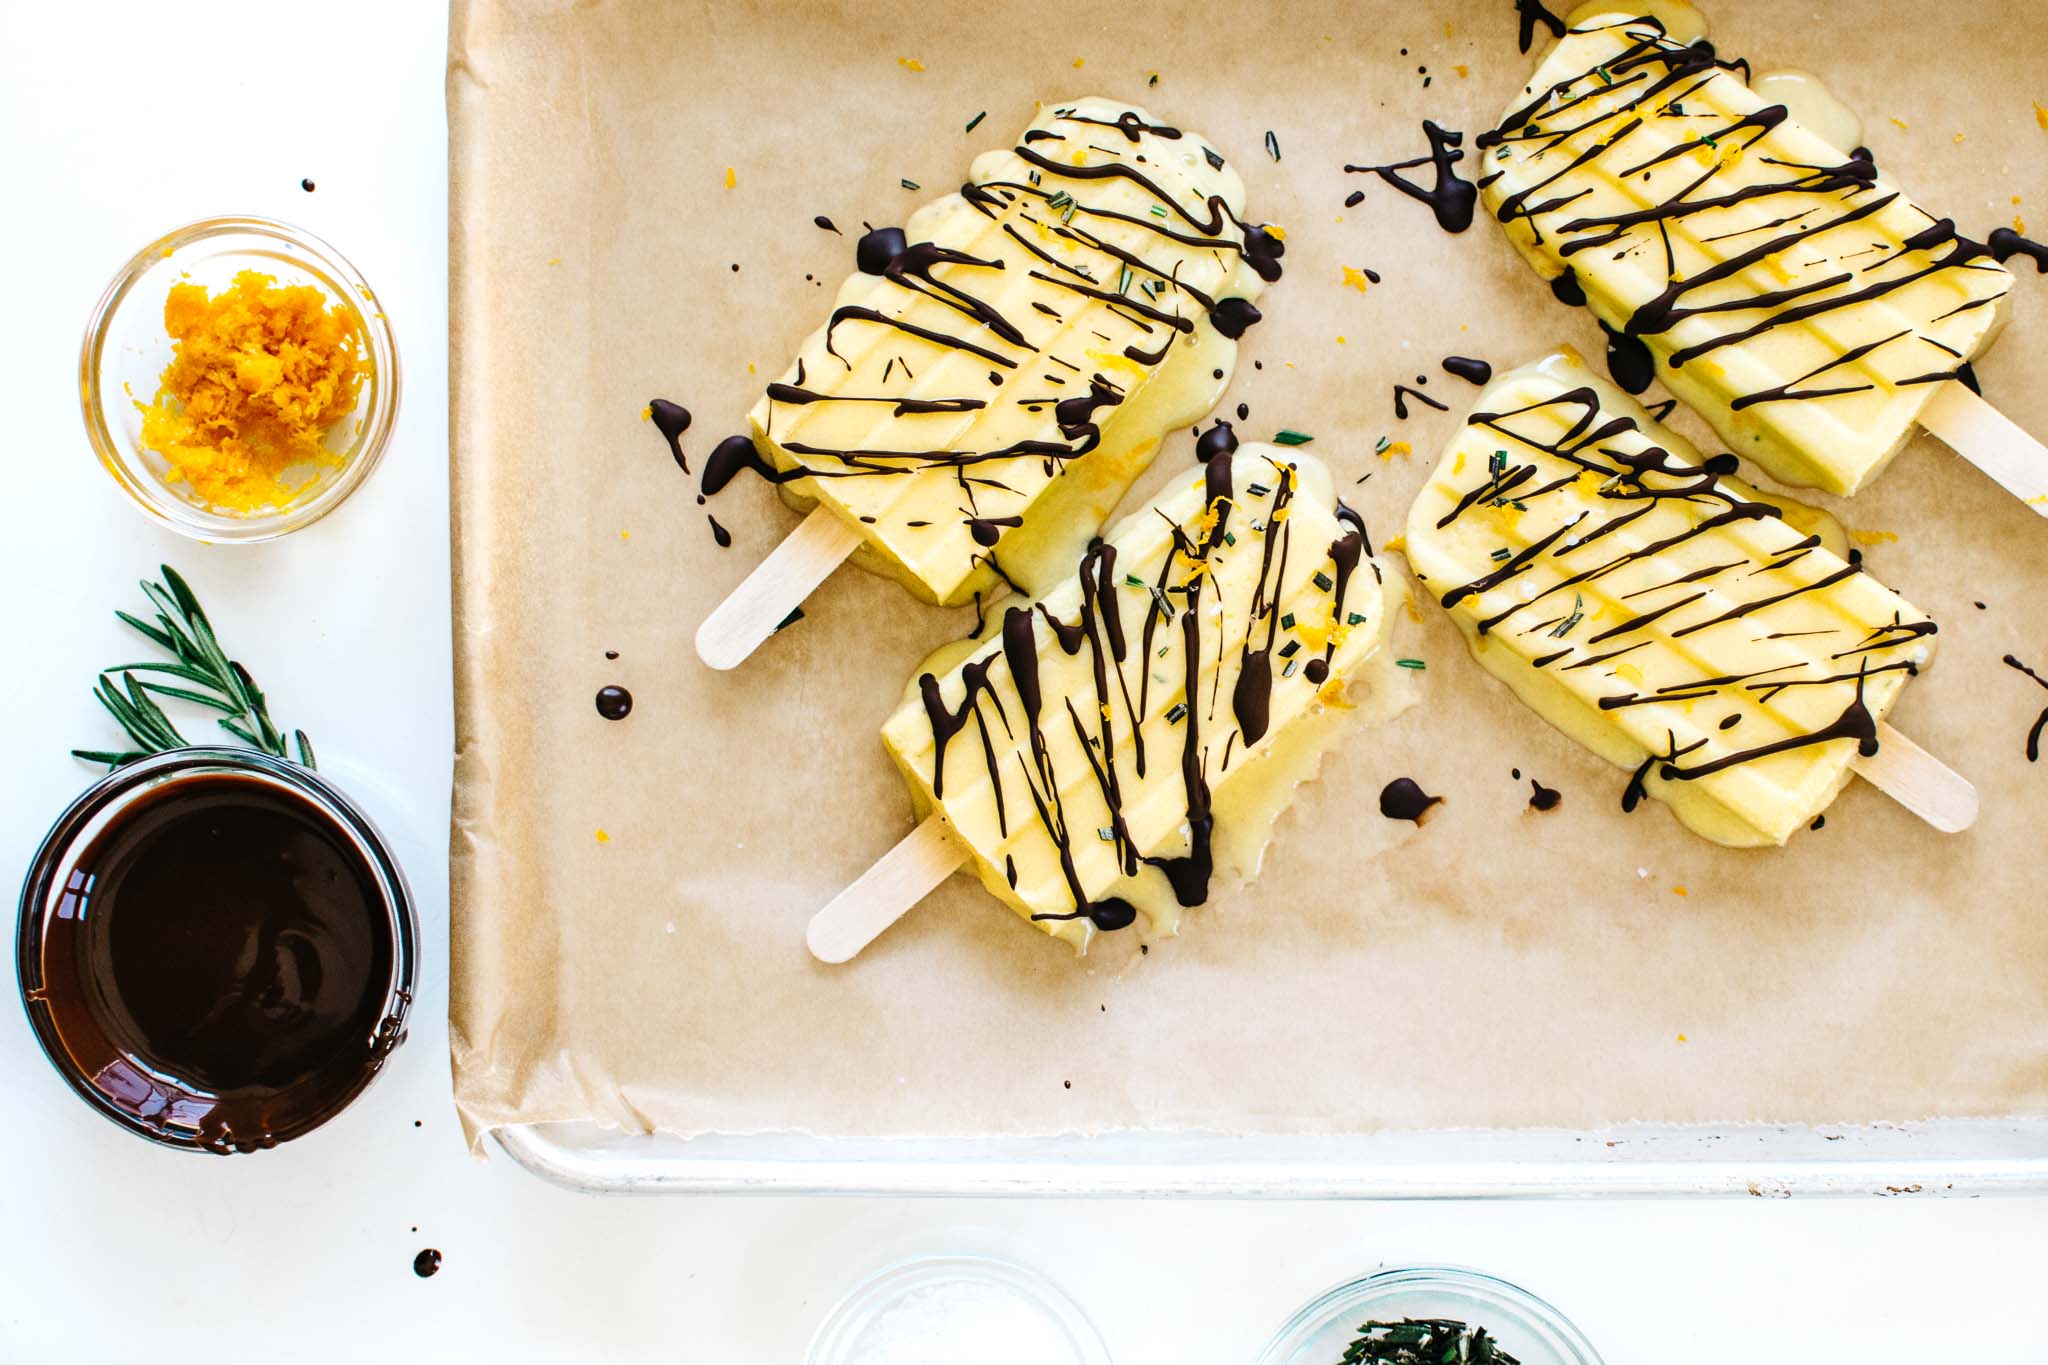 SWEET ORANGE & ROSEMARY CREAMSICLES WITH SALTY CHOCOLATE DRIZZLE + KALE & CARAMEL: RECIPES FOR BODY, HEART, AND TABLE IS BORN!